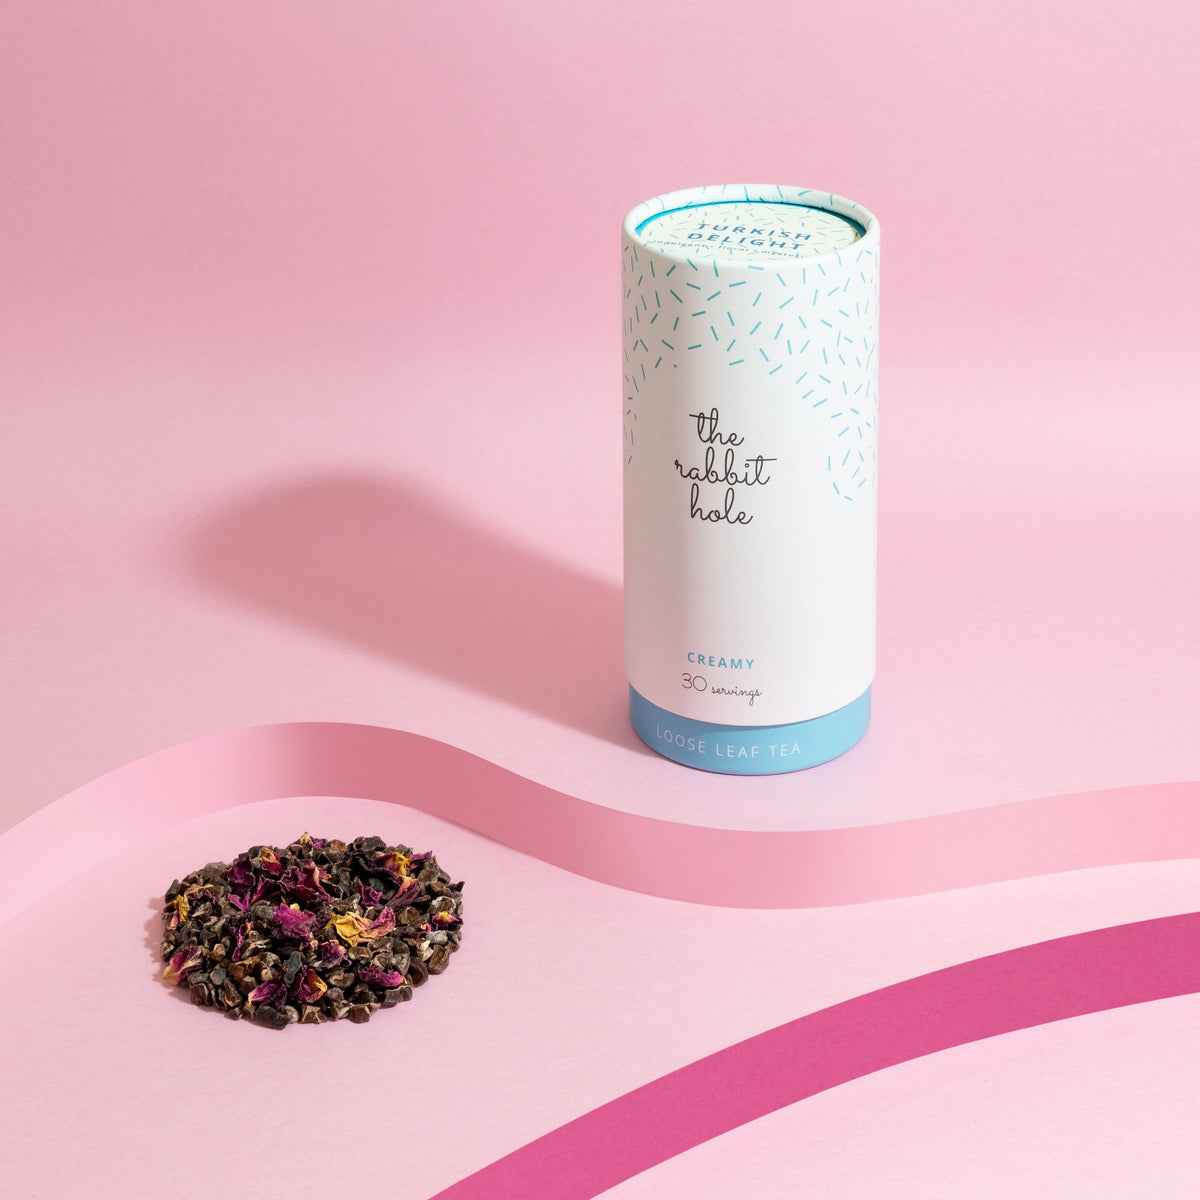 Turkish Delight Creamy loose leaf tea by The Rabbit Hole - Australian Made Tea - canister on a pink background